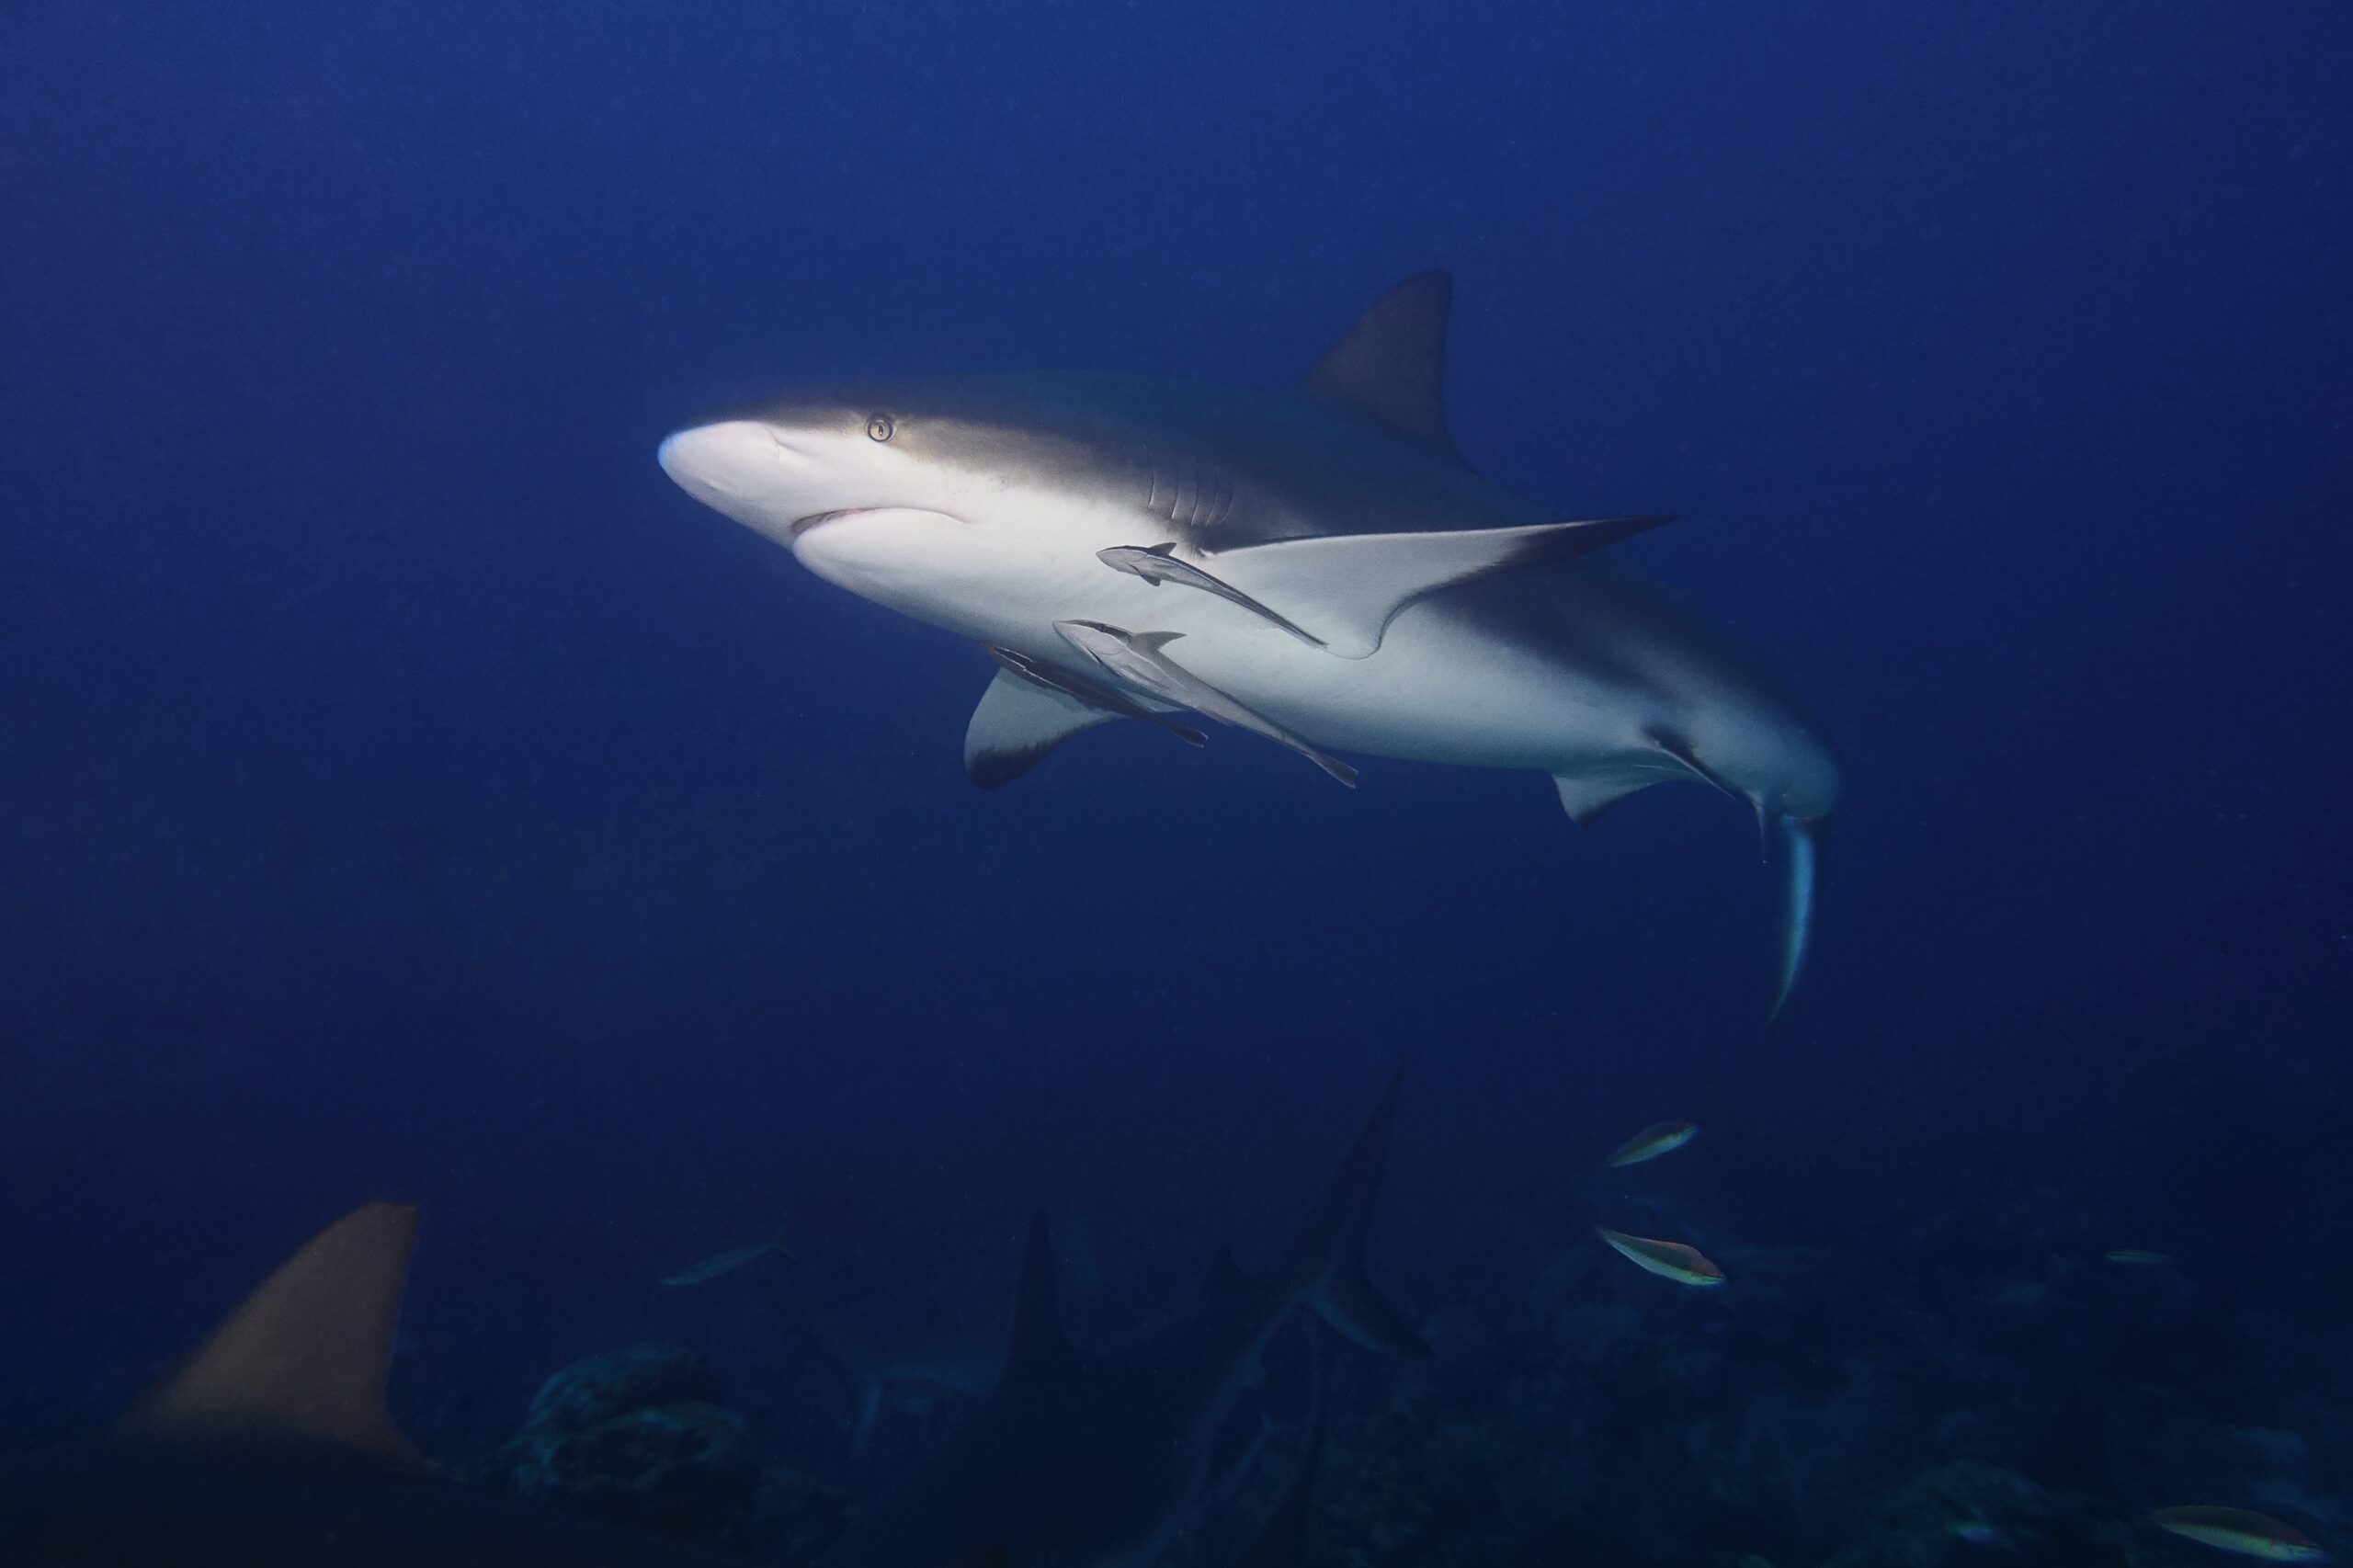 Bull sharks are in the "Big Three" in the shark attack world, alongside white and tiger sharks.